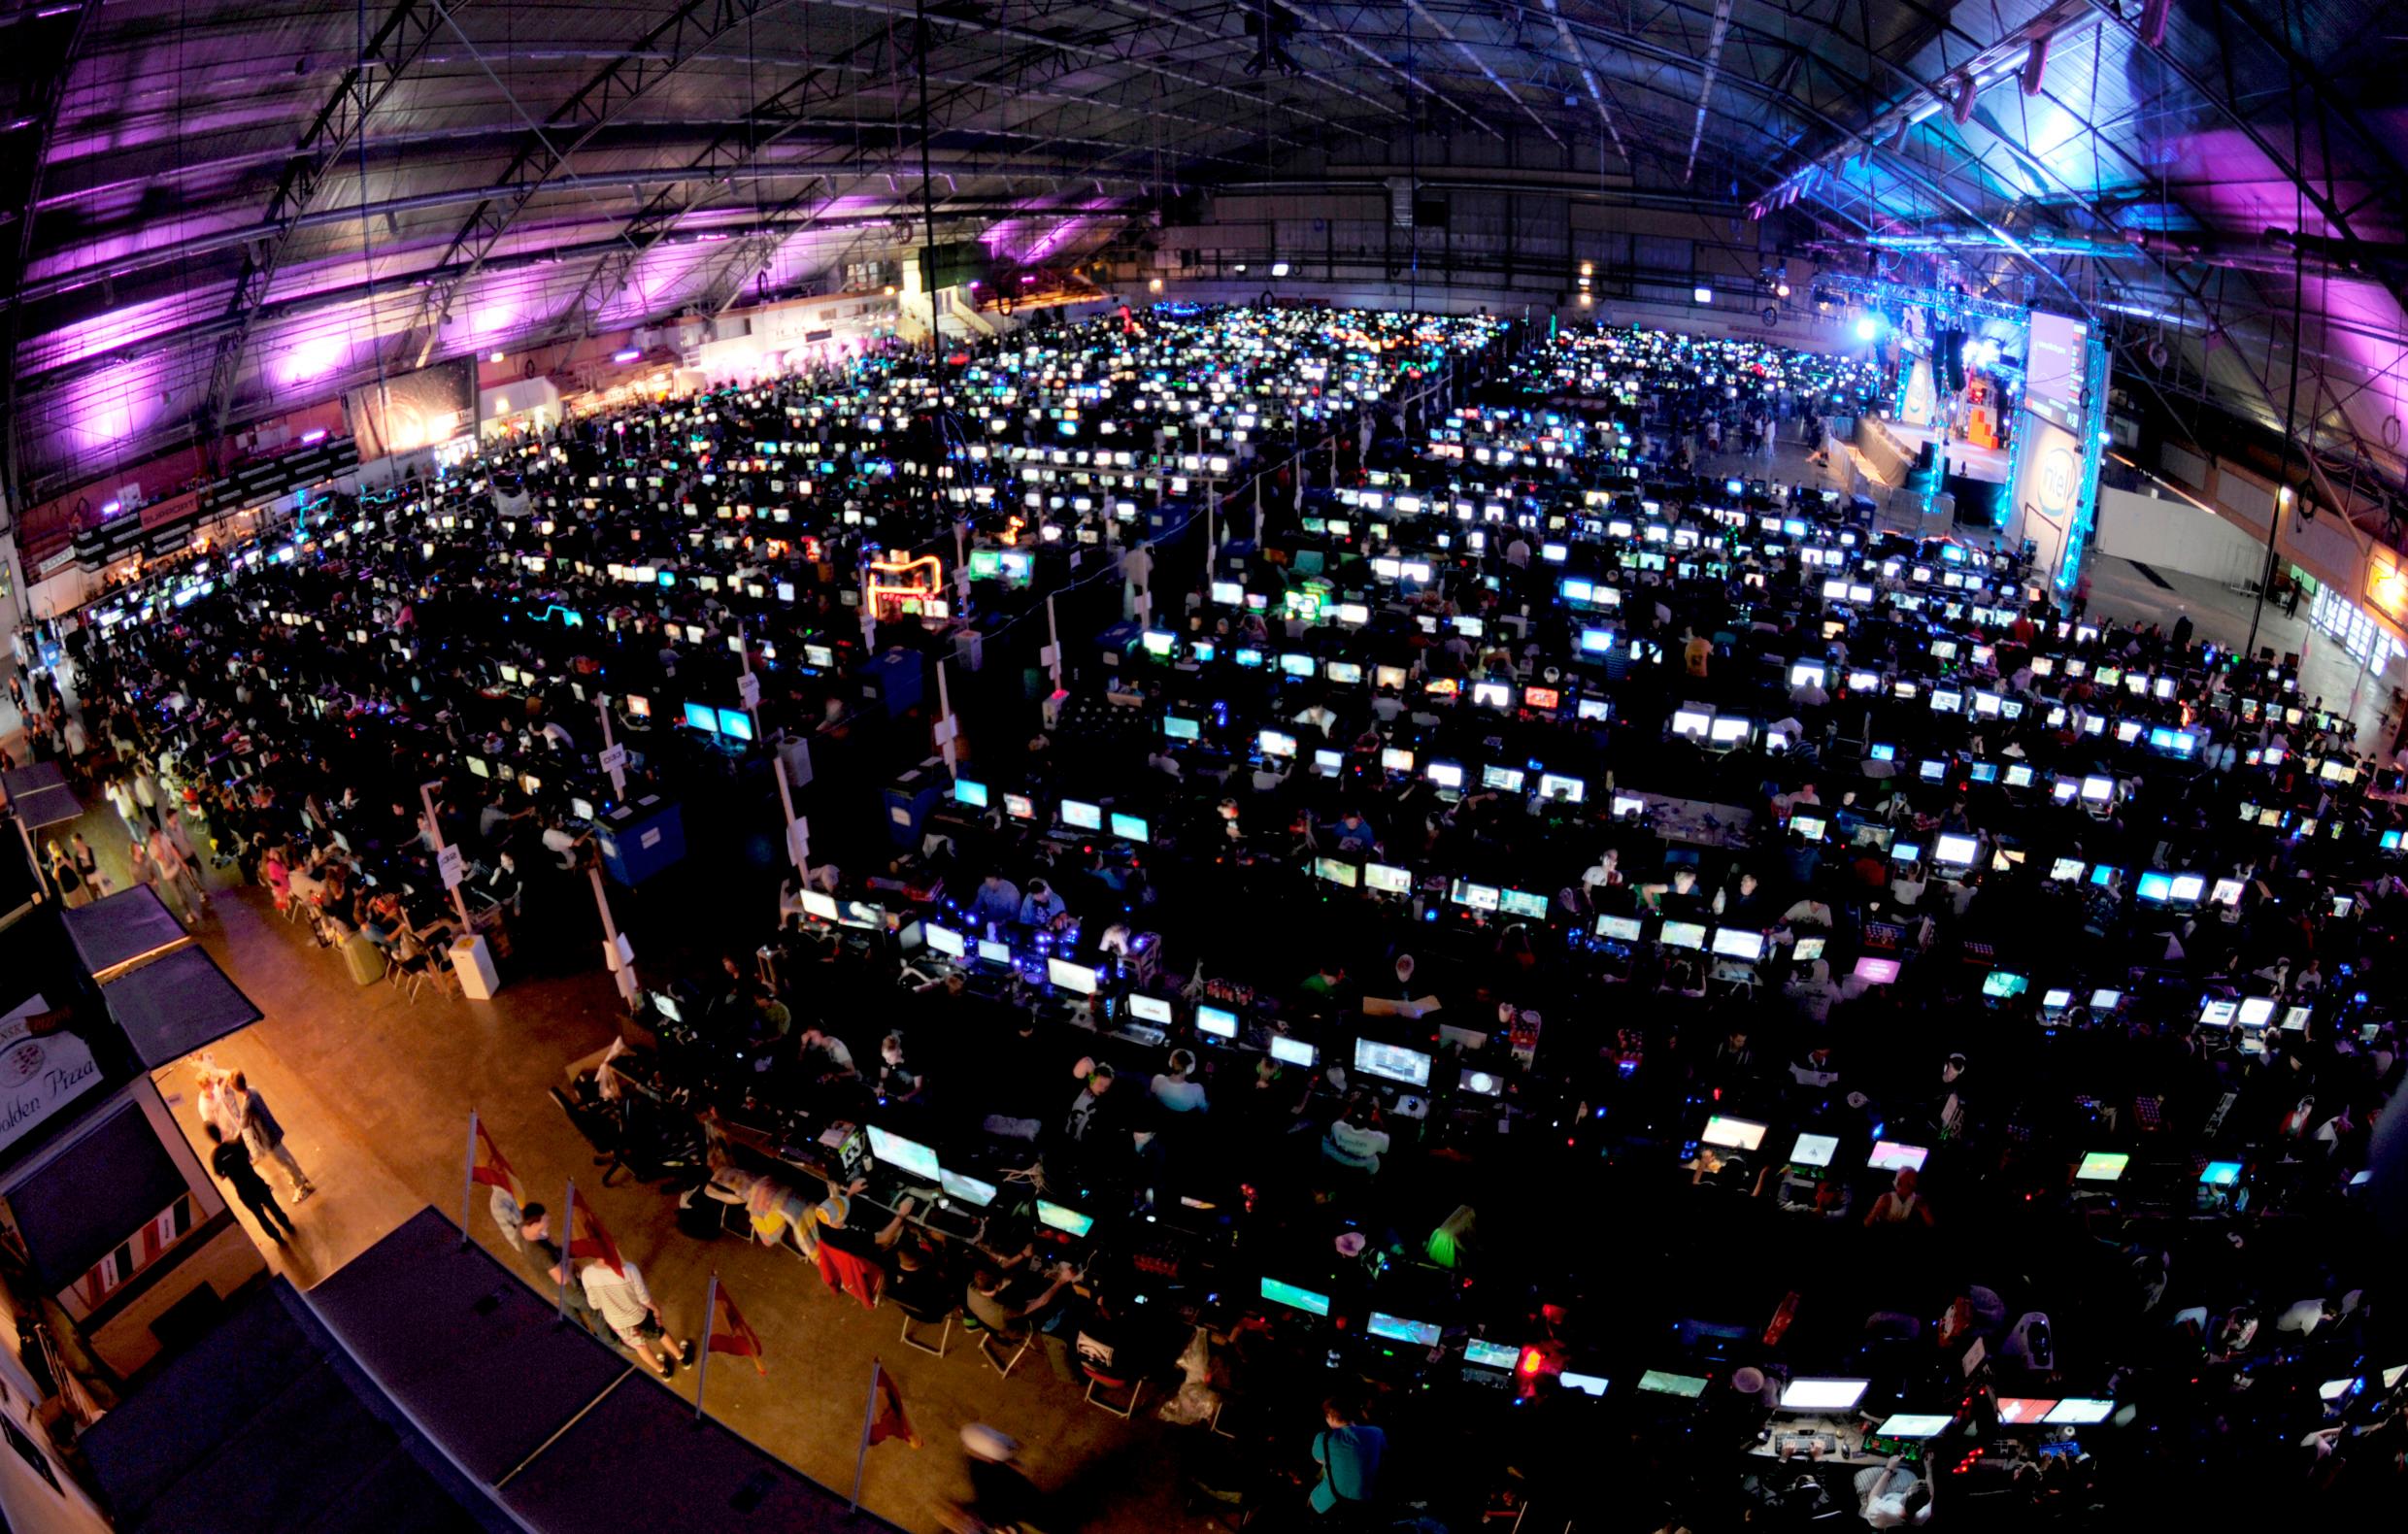 A huge arena filled with lit up computer screens.